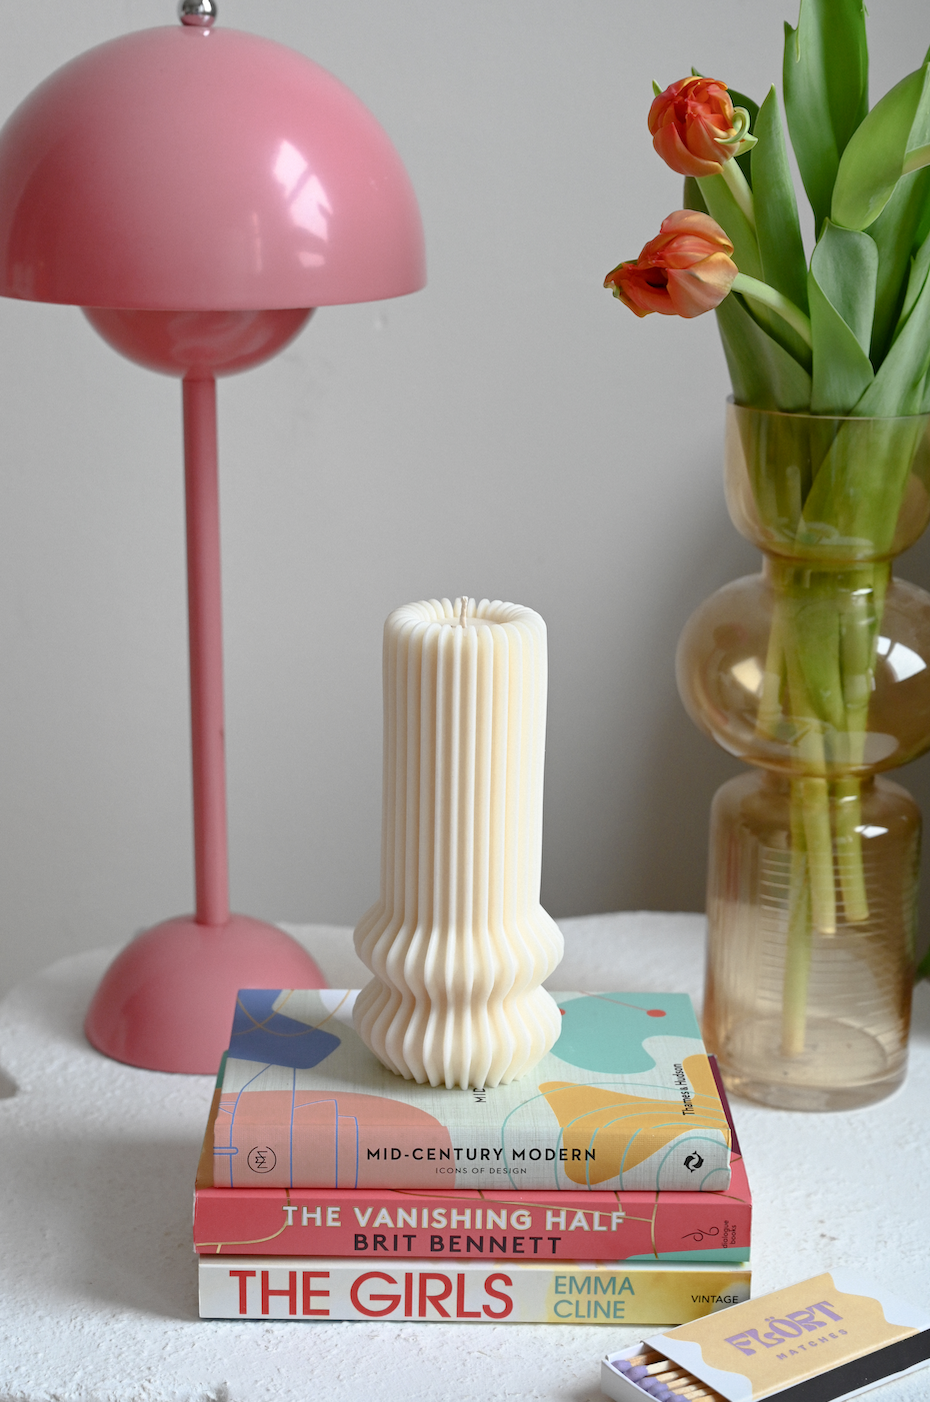 Marlo Sculptural Candle